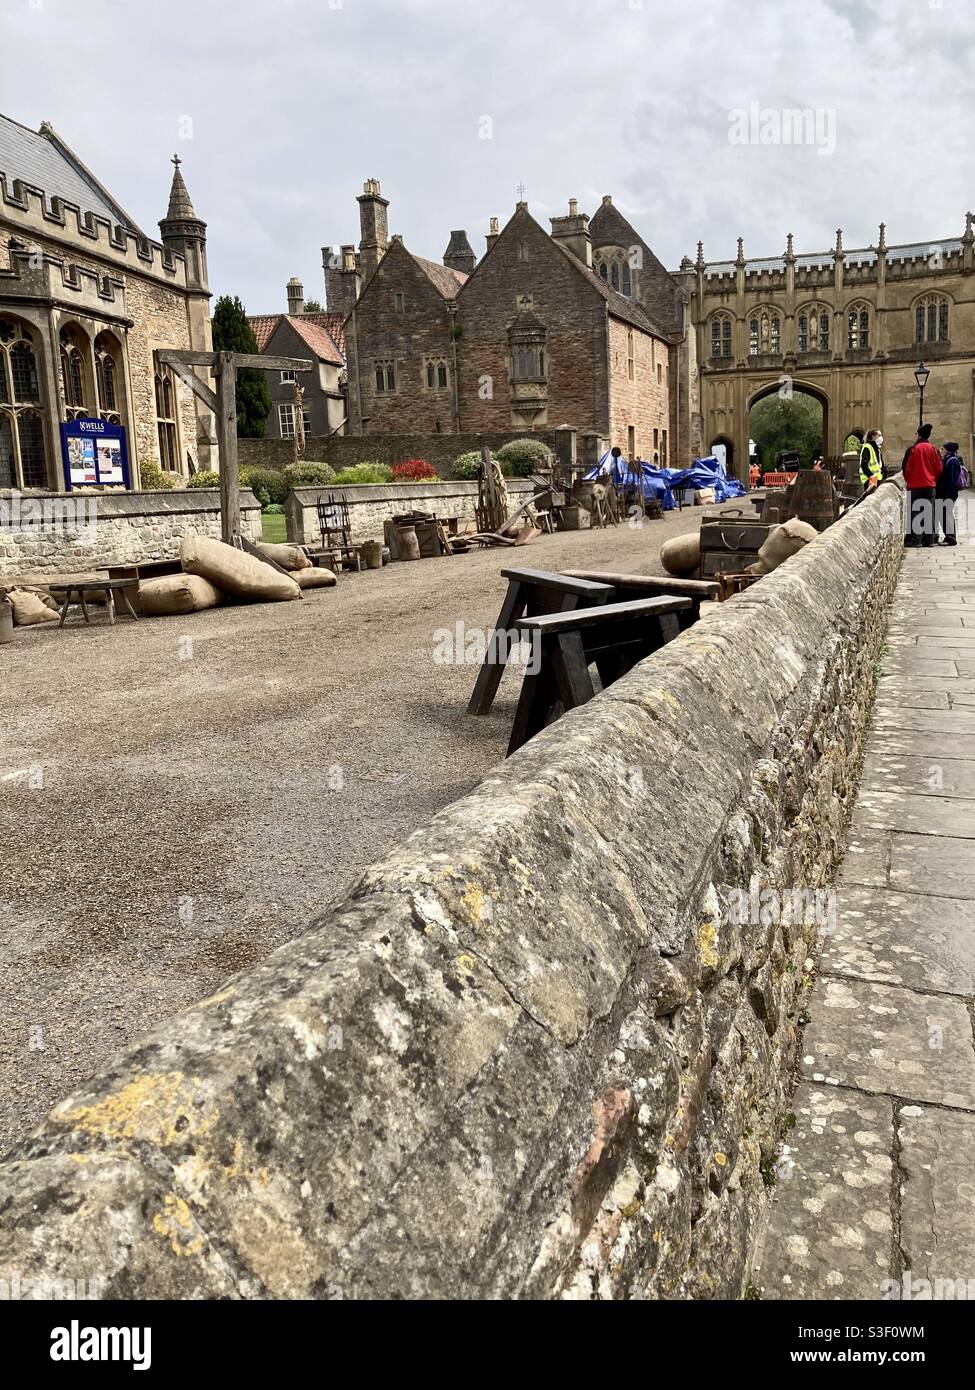 Members of the public asking questions about the film set on location in Wells, Somerset for filming the American TV series Becoming Elizabeth set in the Tudor period Stock Photo